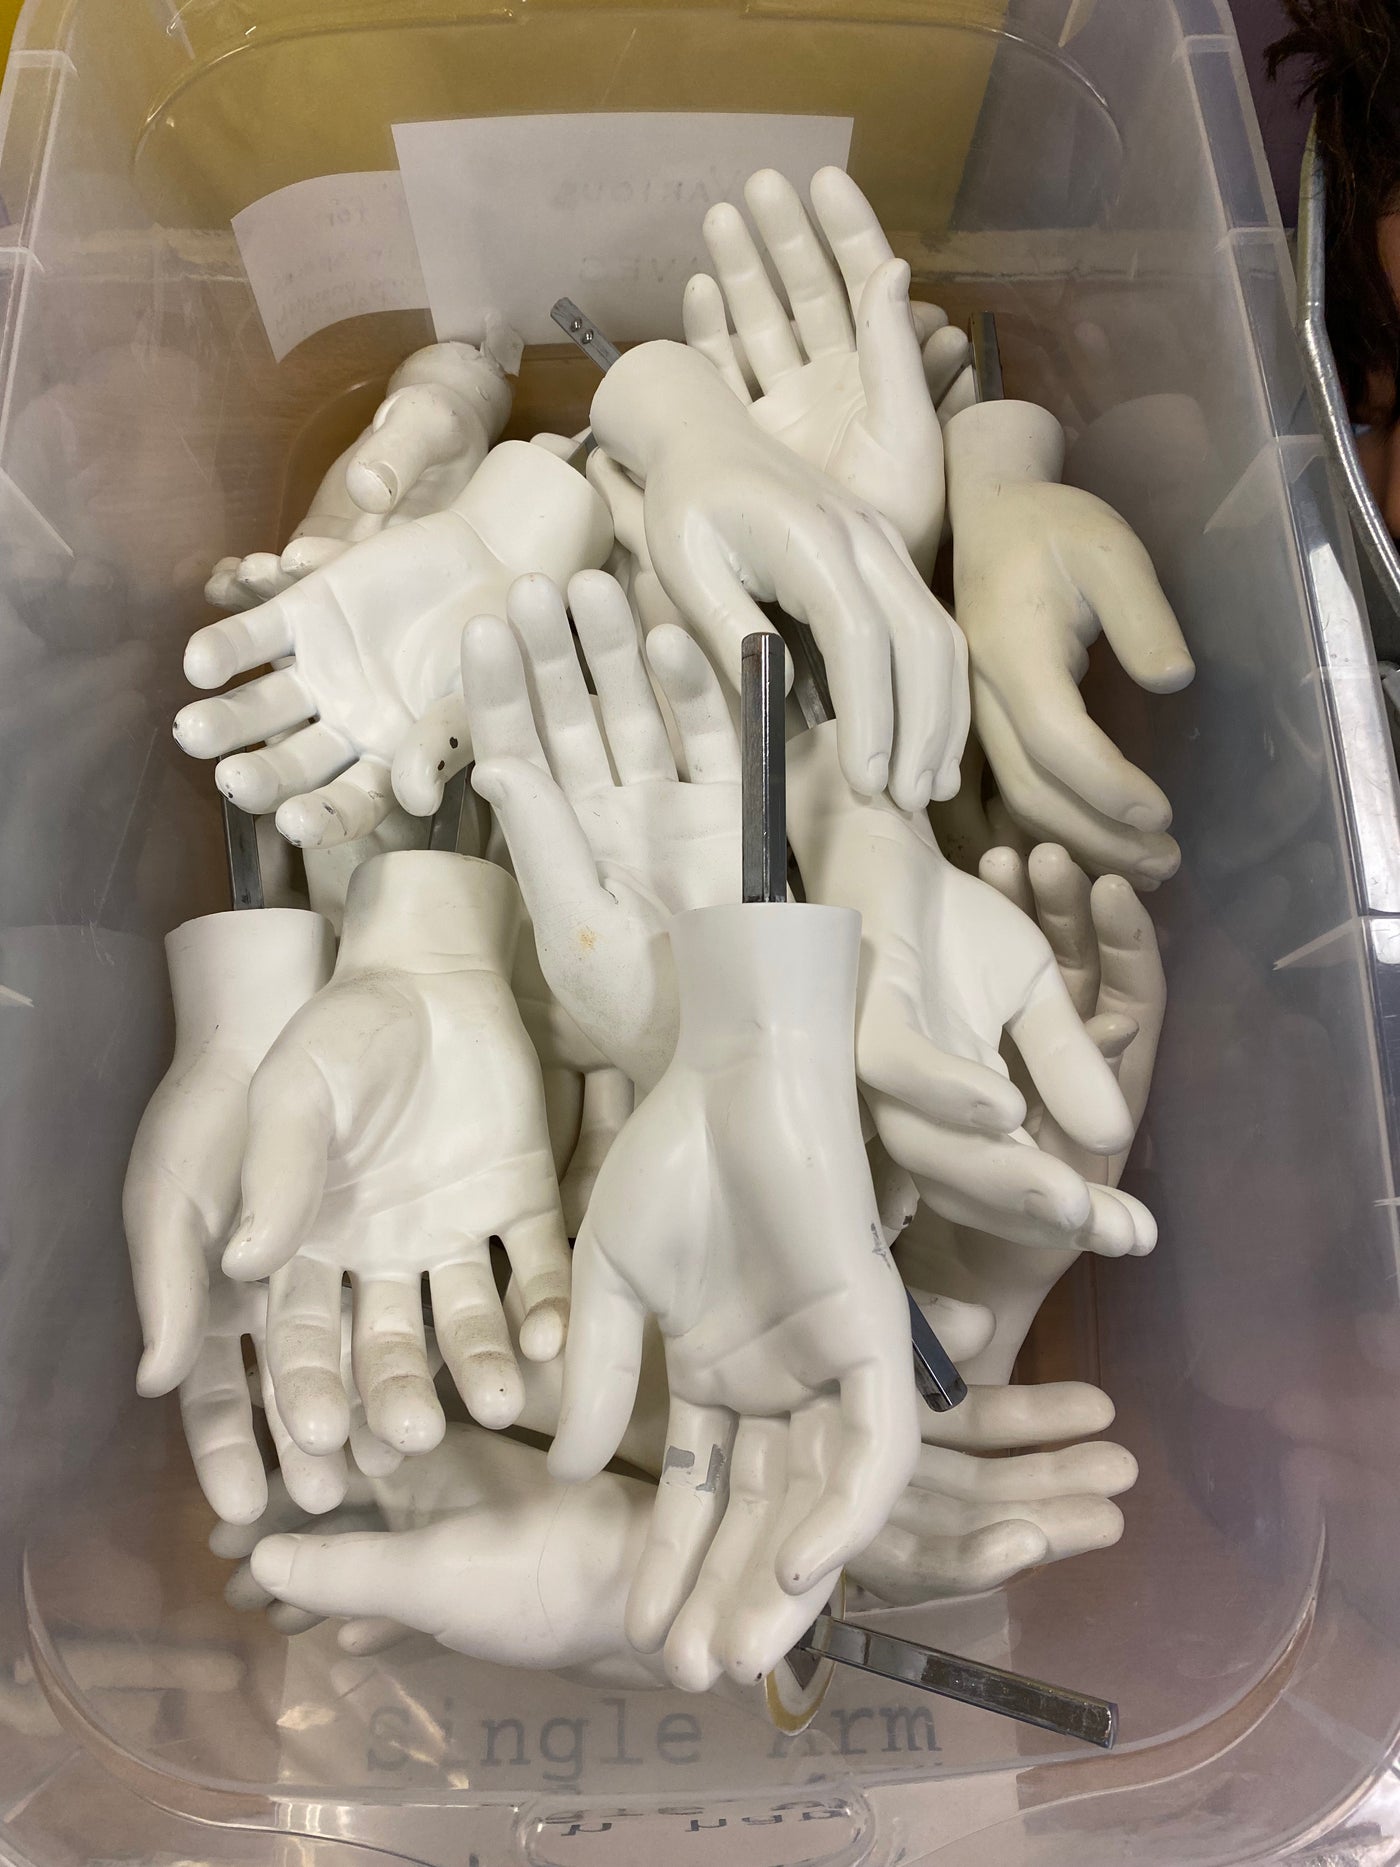 Used Mannequin Hands - Set of 4